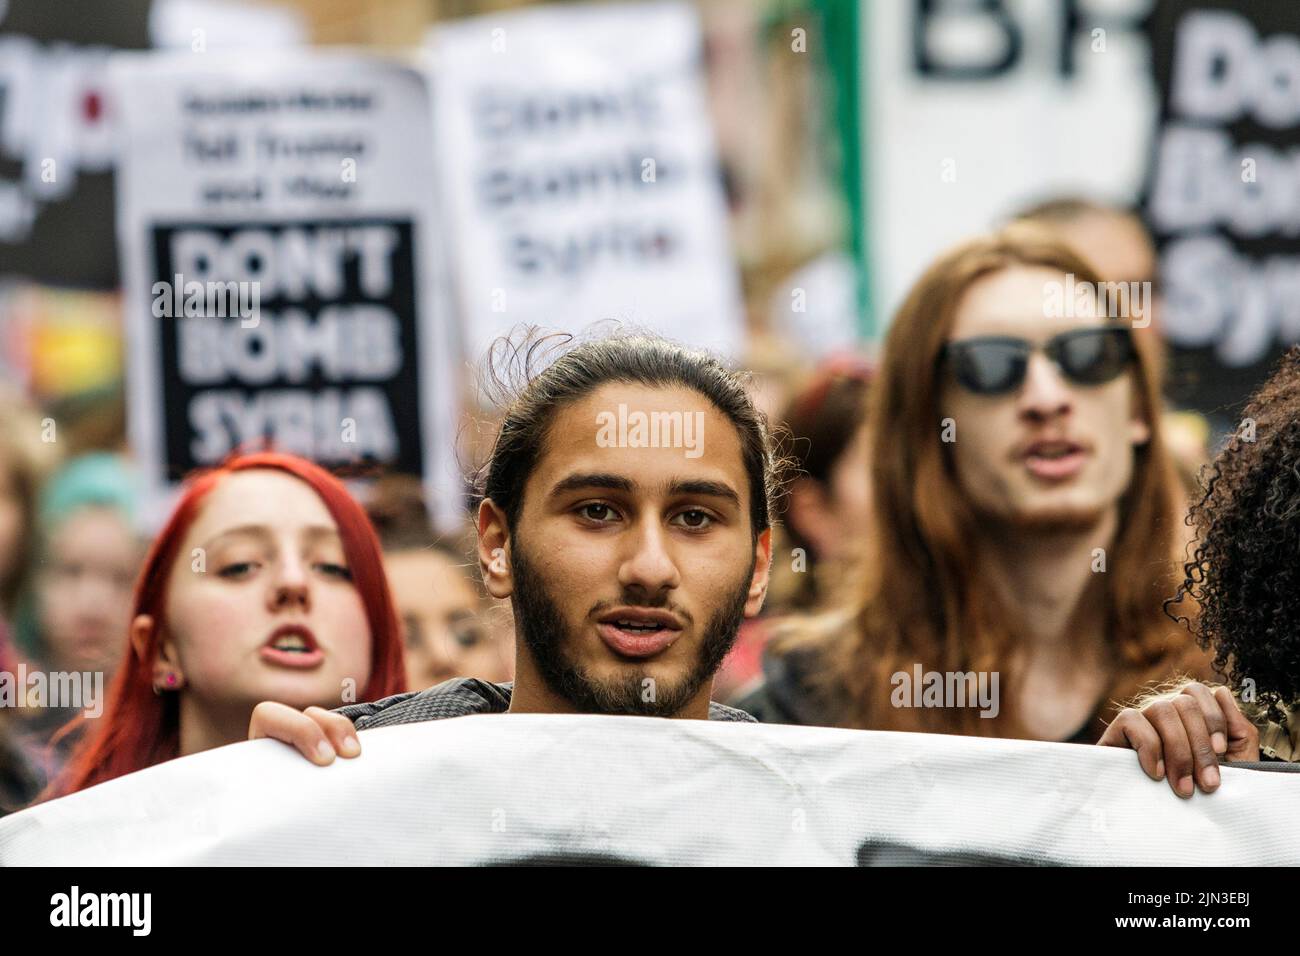 Protesters carrying ‘Don’t bomb Syria’ placards are pictured as they march through Bristol during a Stop Bombing Syria protest march.16th April, 2018 Stock Photo